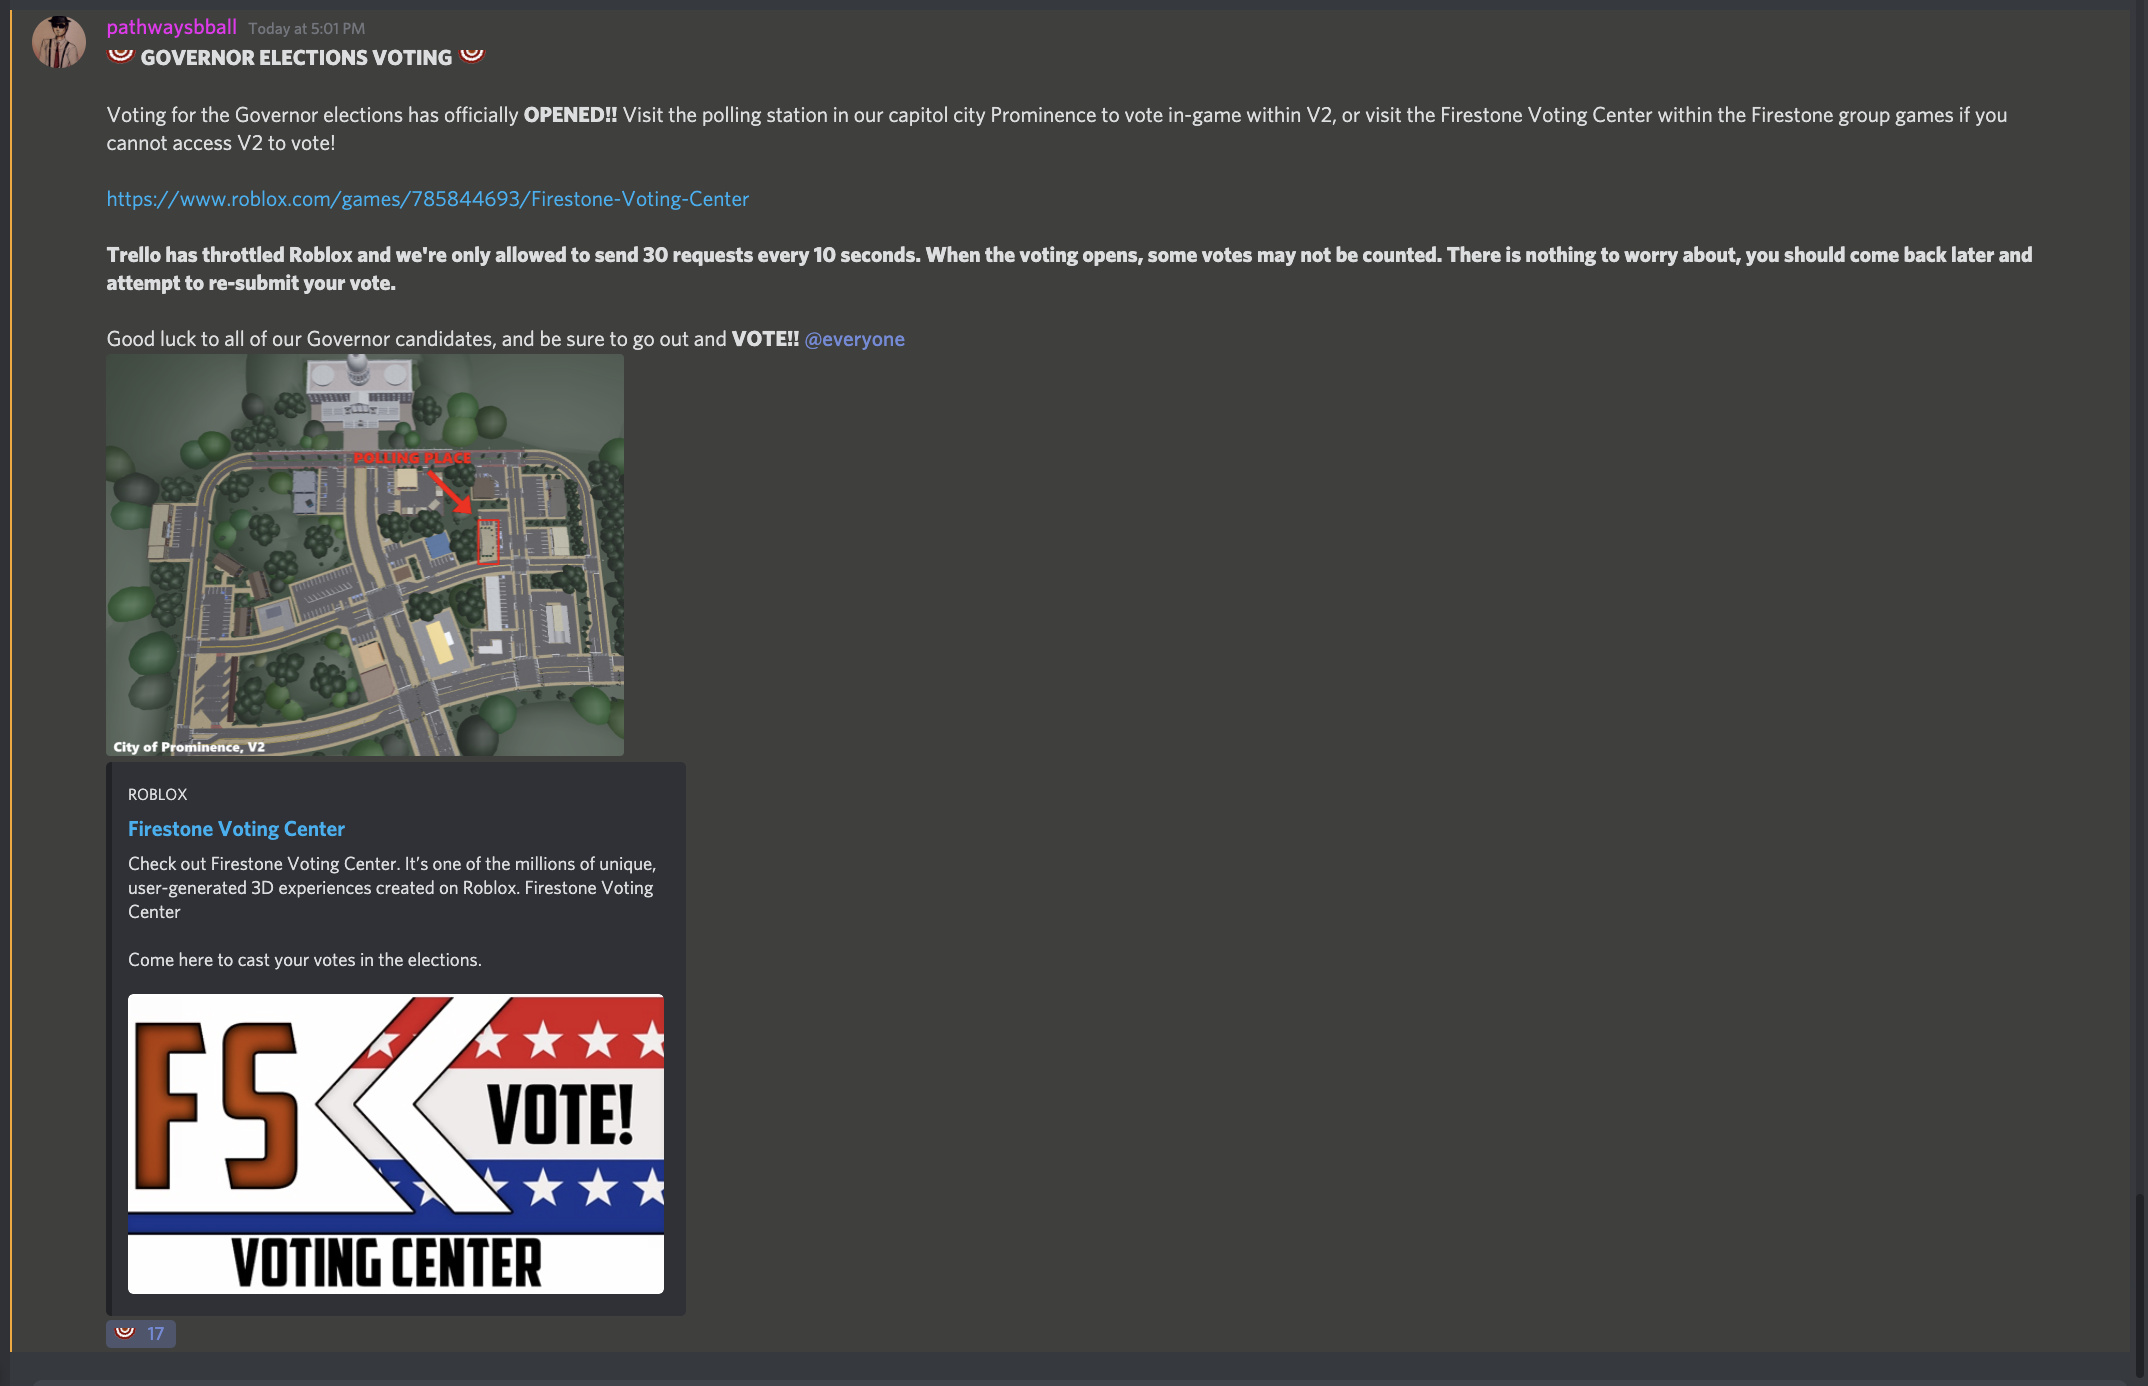 How To Vote For The 2020 Gubernatorial Elections Voting Open Voting Open Guidelines State Of Firestone Forums - roblox pbb fire stone